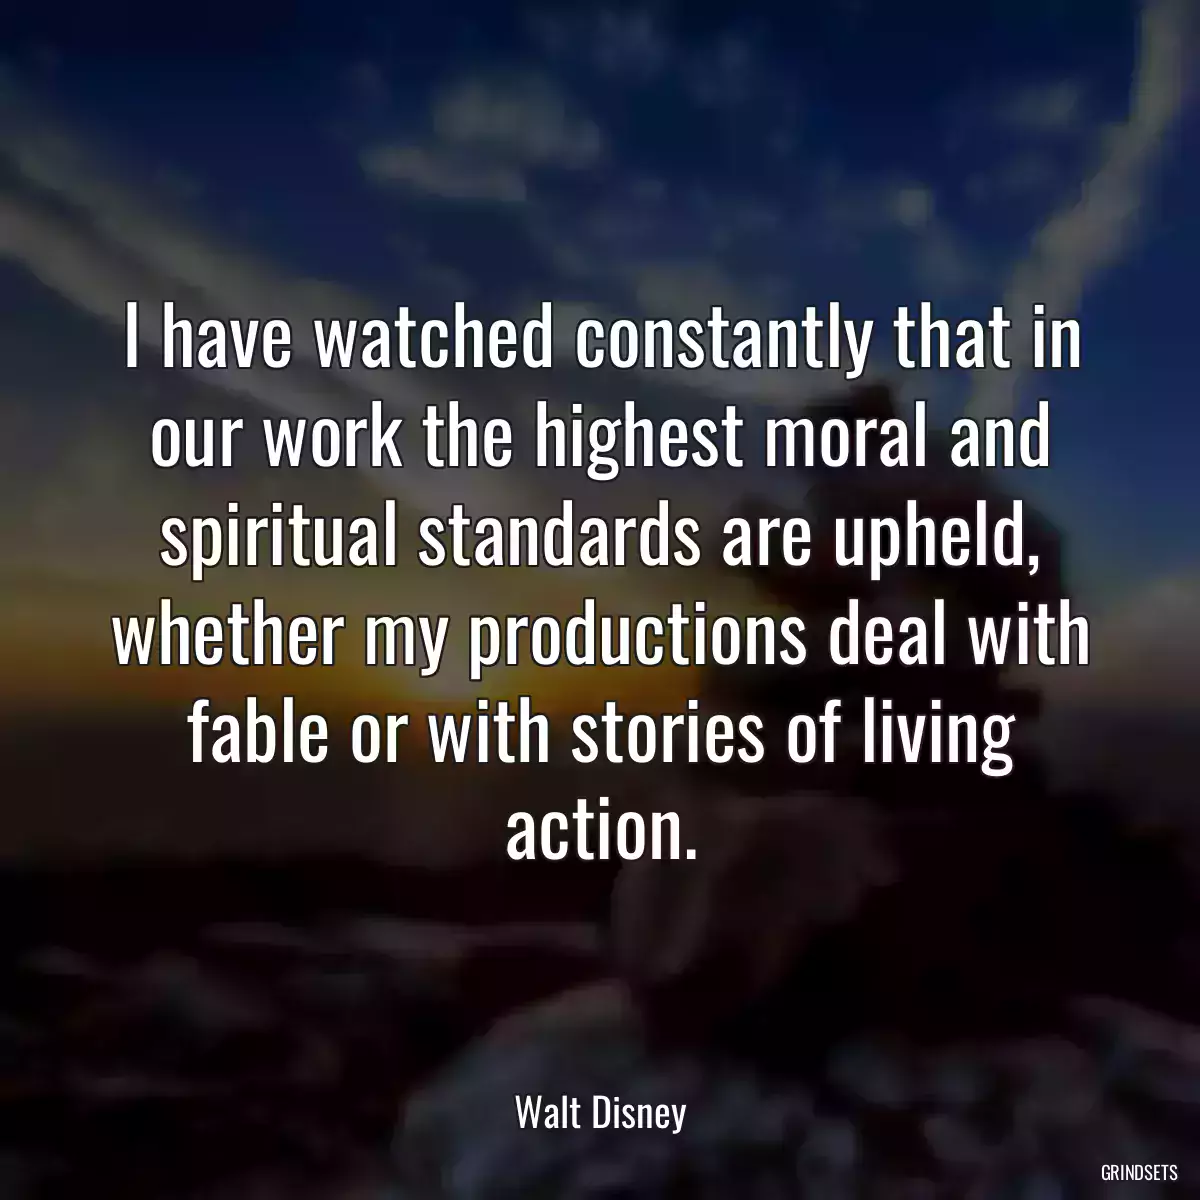 I have watched constantly that in our work the highest moral and spiritual standards are upheld, whether my productions deal with fable or with stories of living action.